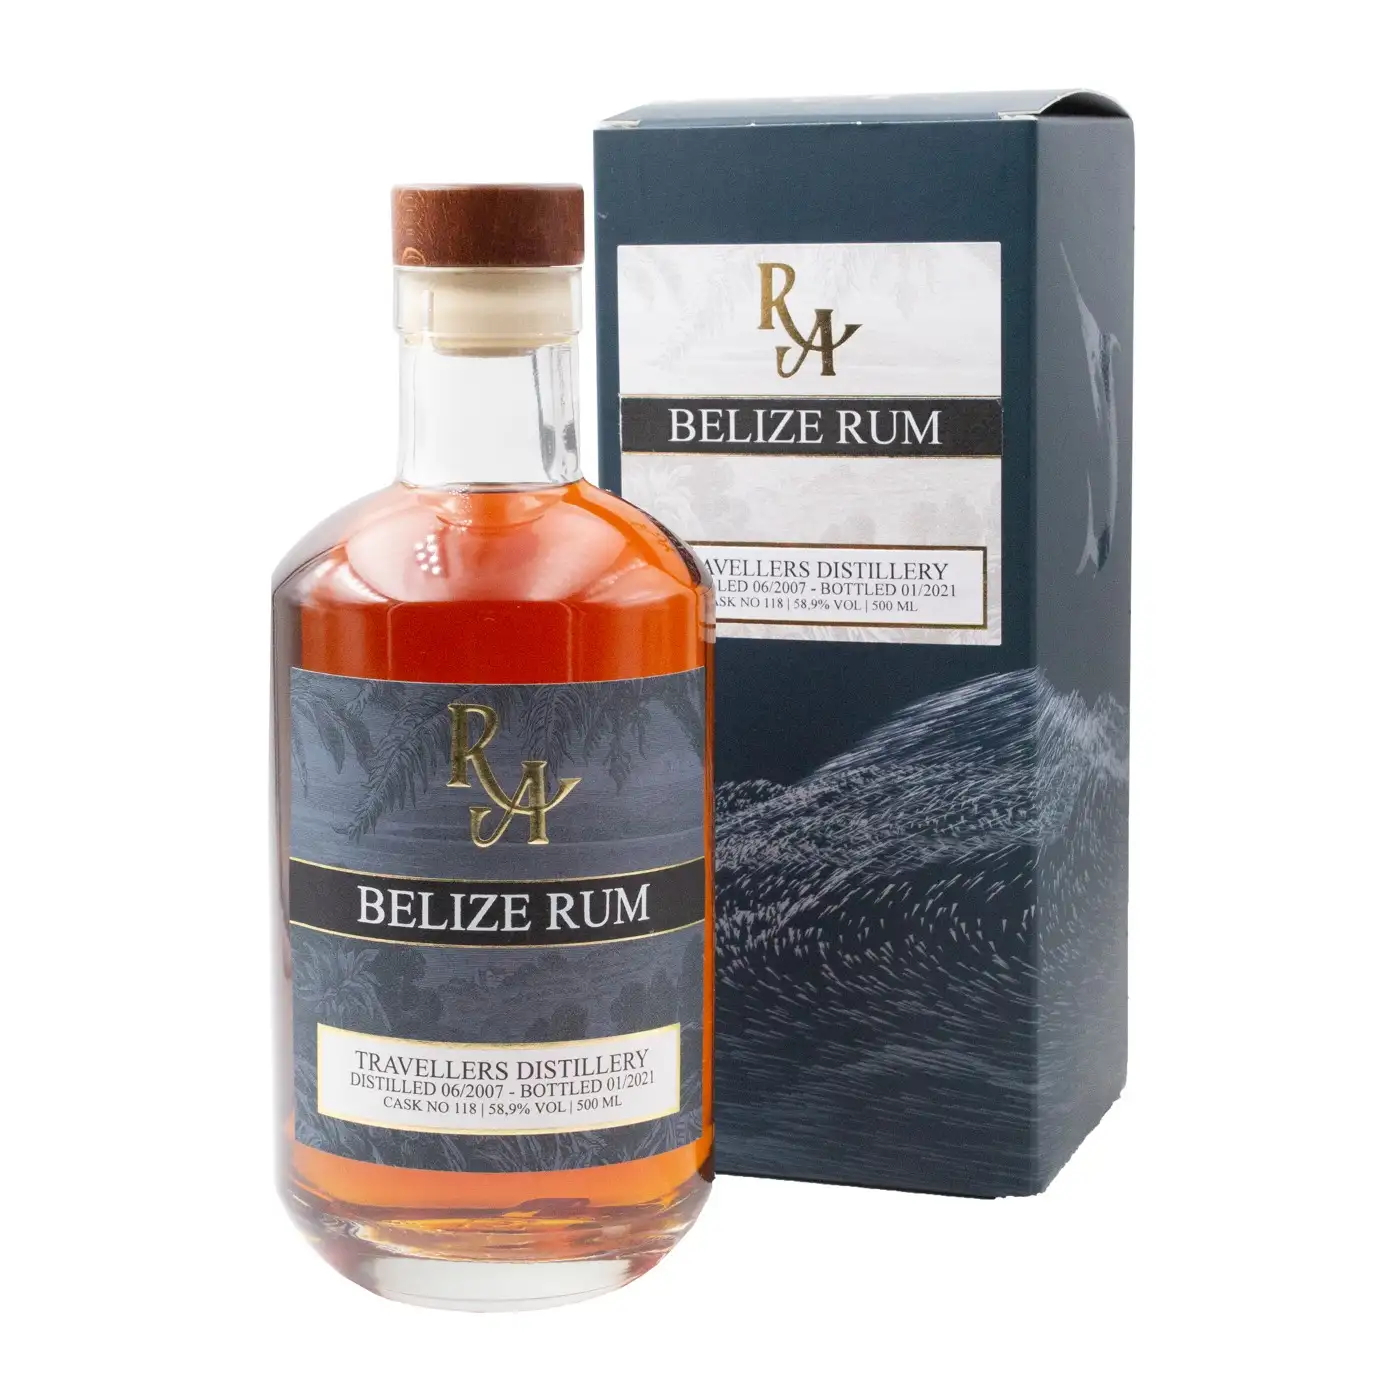 Image of the front of the bottle of the rum Rum Artesanal Belize Rum MBT